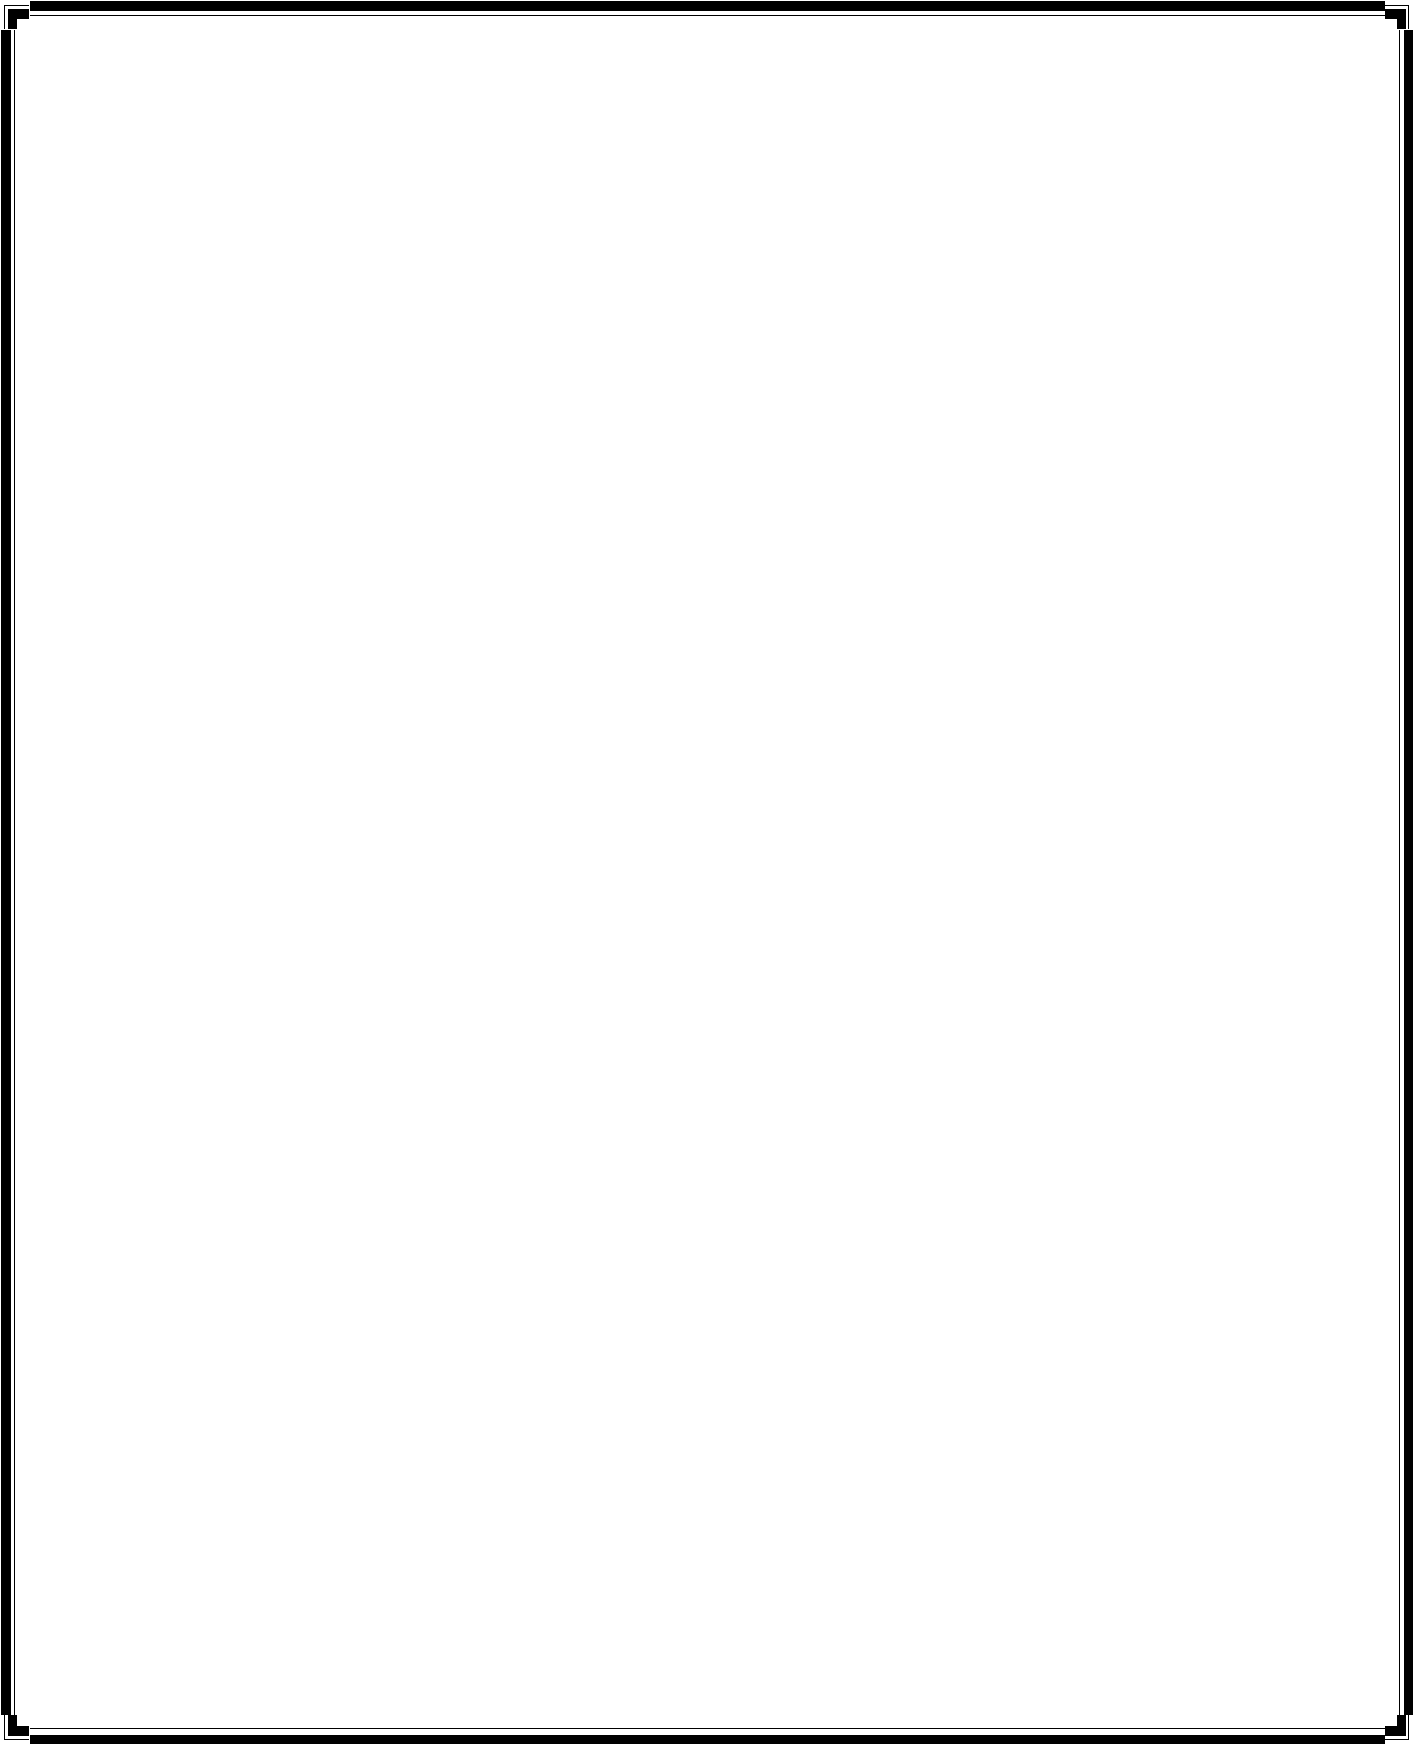 A Black Screen With White Border